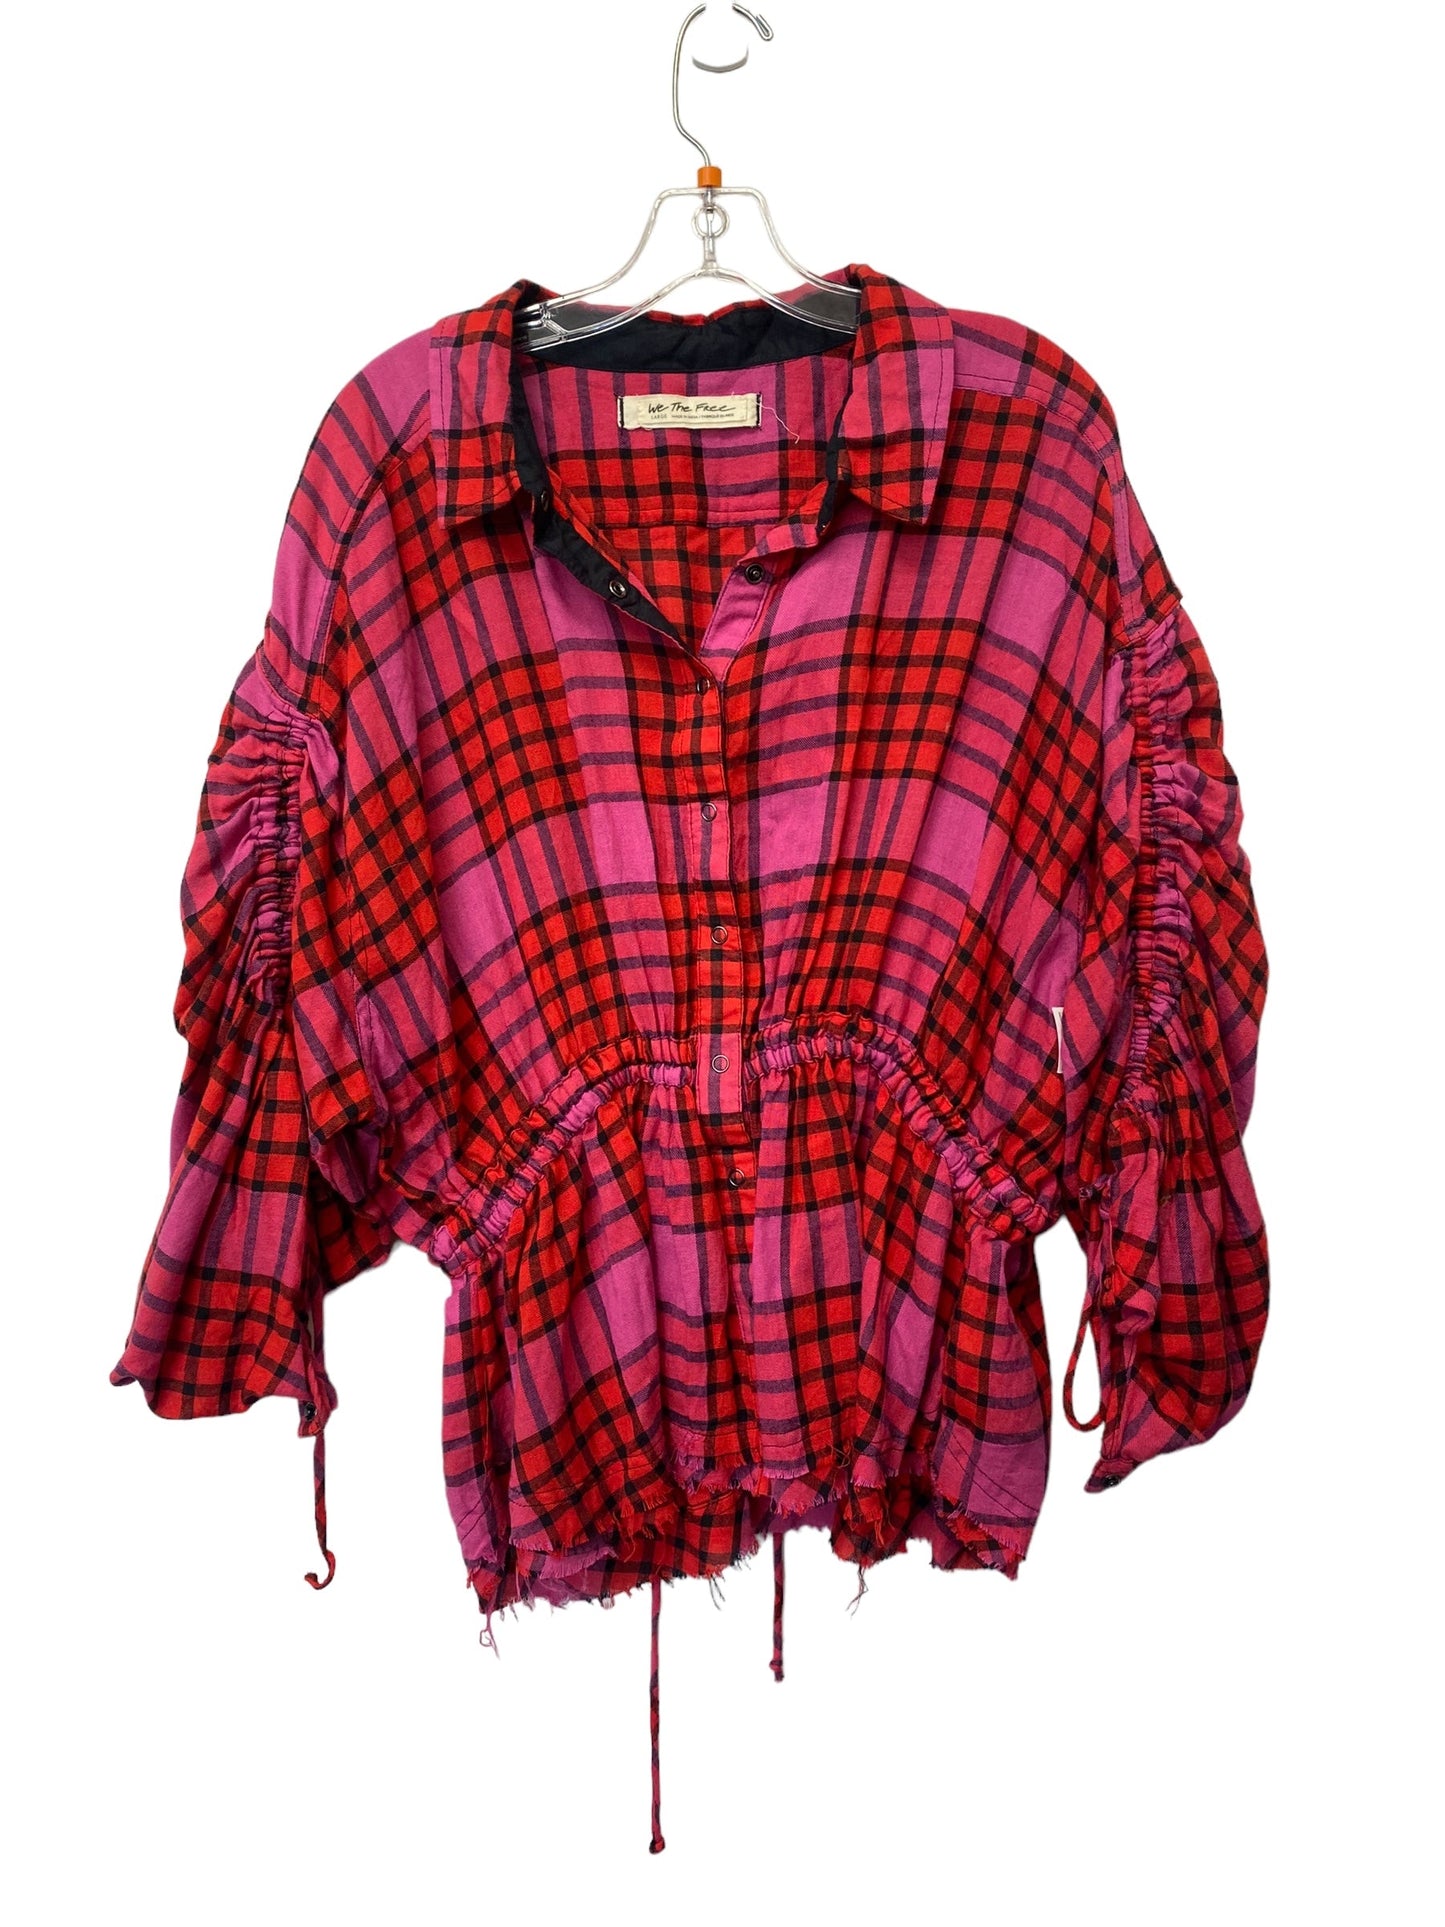 Plaid Pattern Top Long Sleeve We The Free, Size L